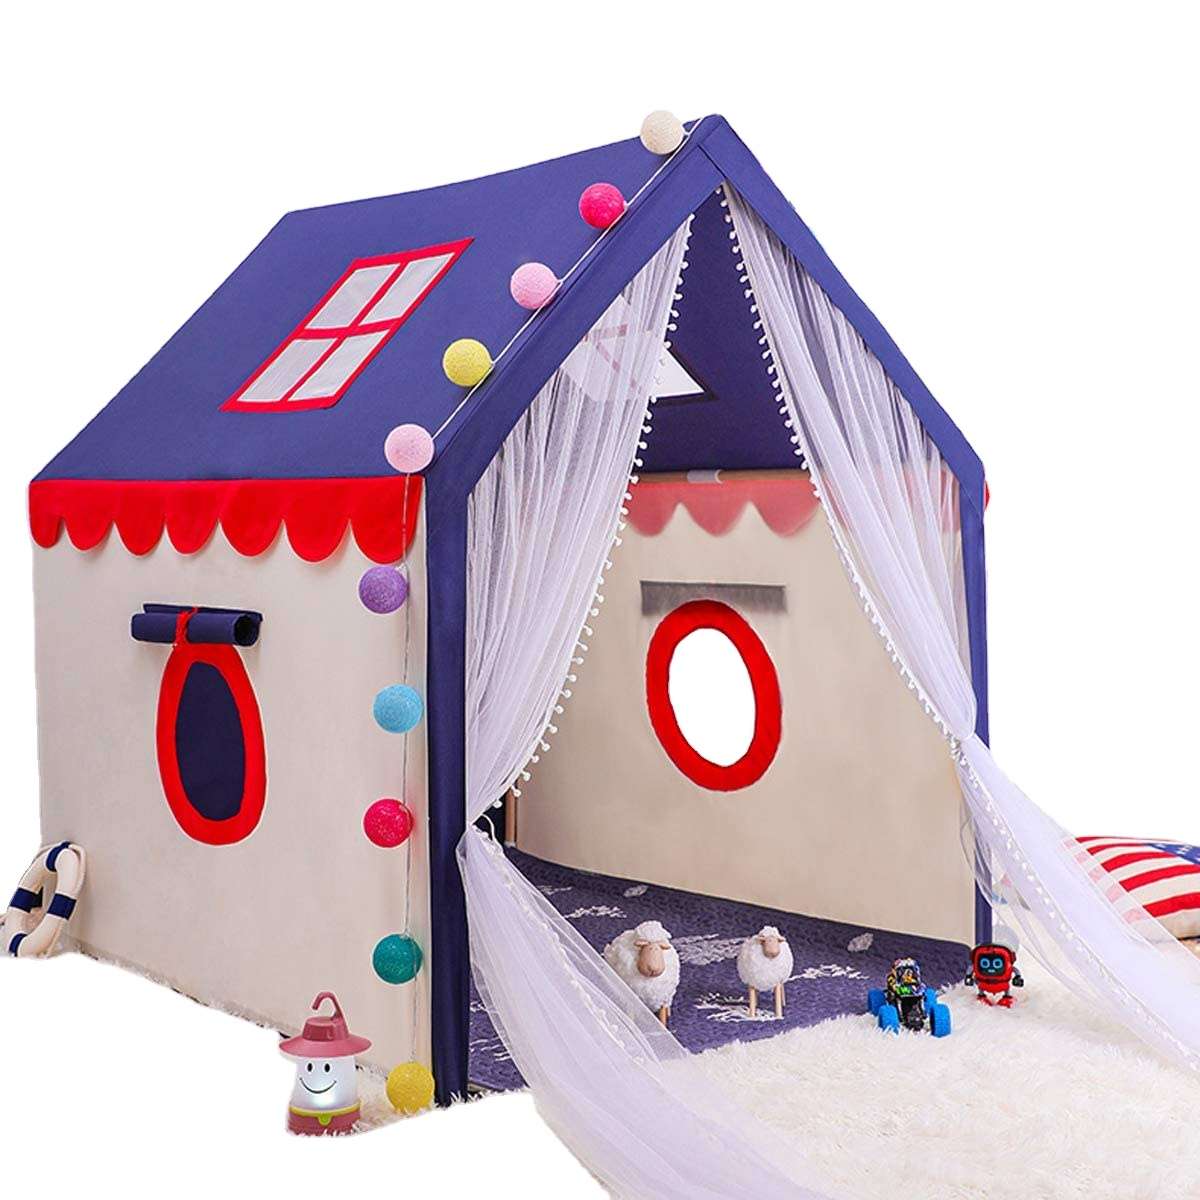 Outdoor game house yurt tent play set kids camping toys Factory direct selling